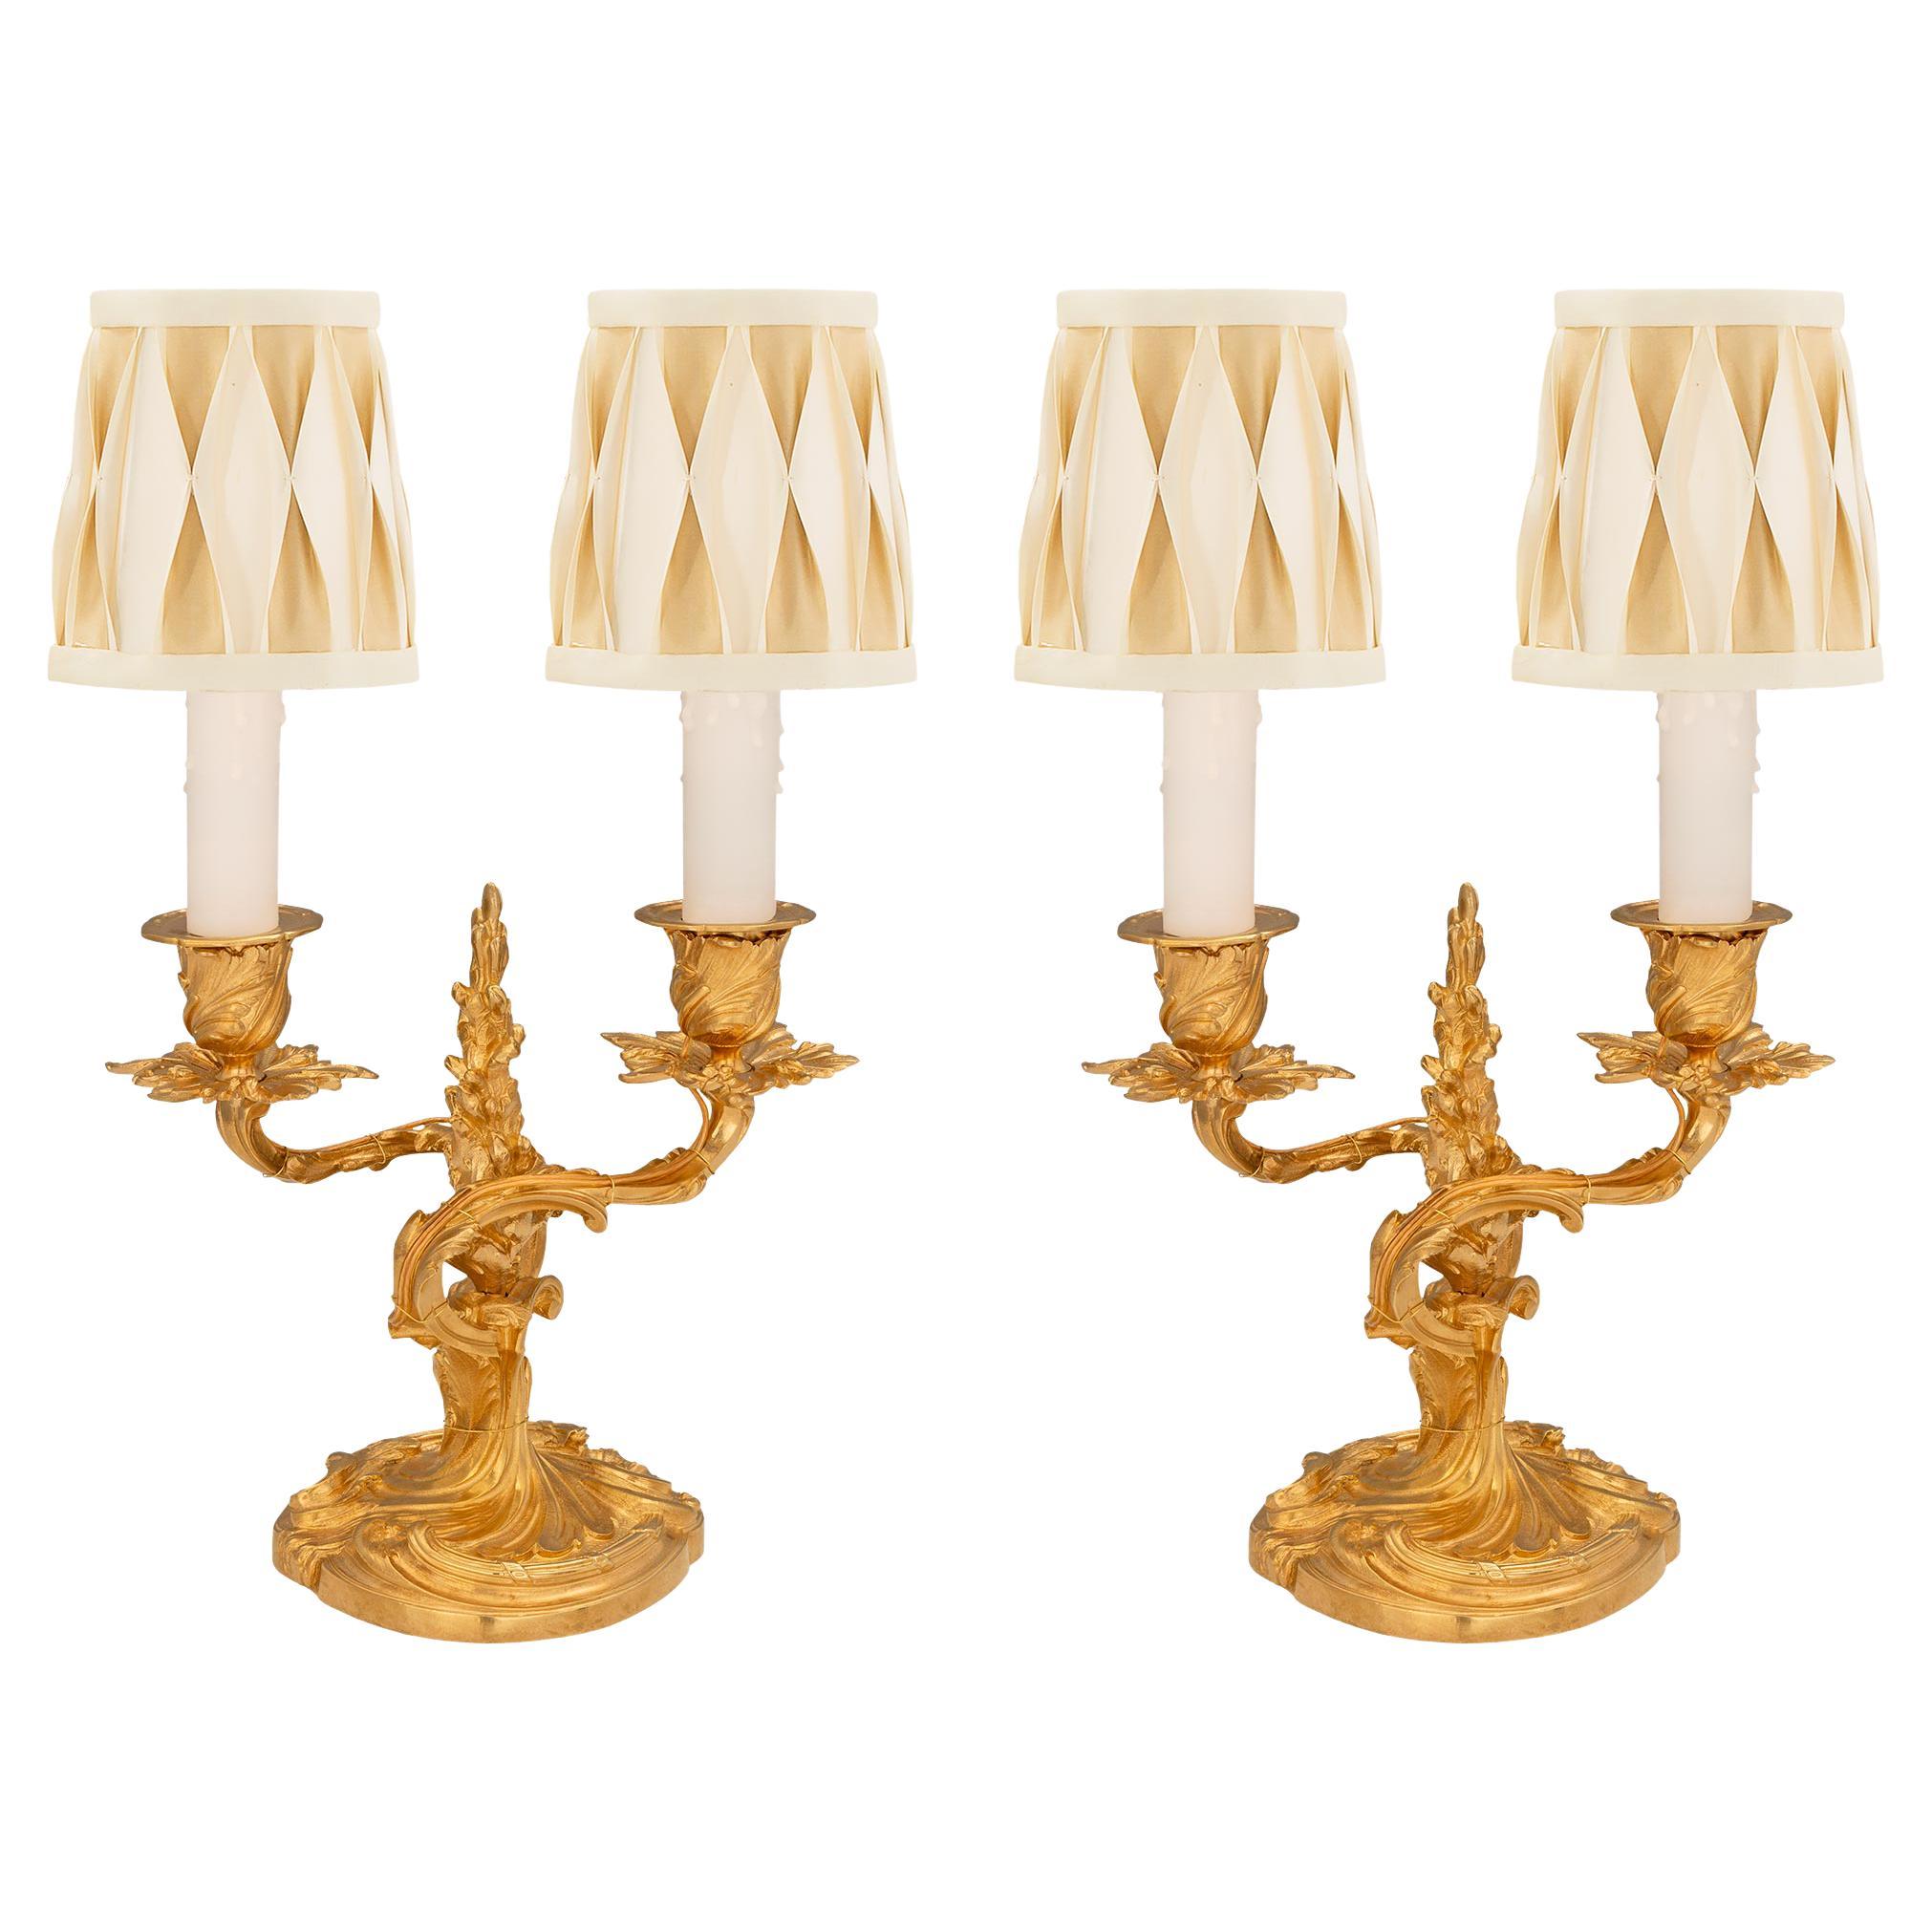 Pair of French 19th Century Louis XV Style Ormolu Candelabra Lamps